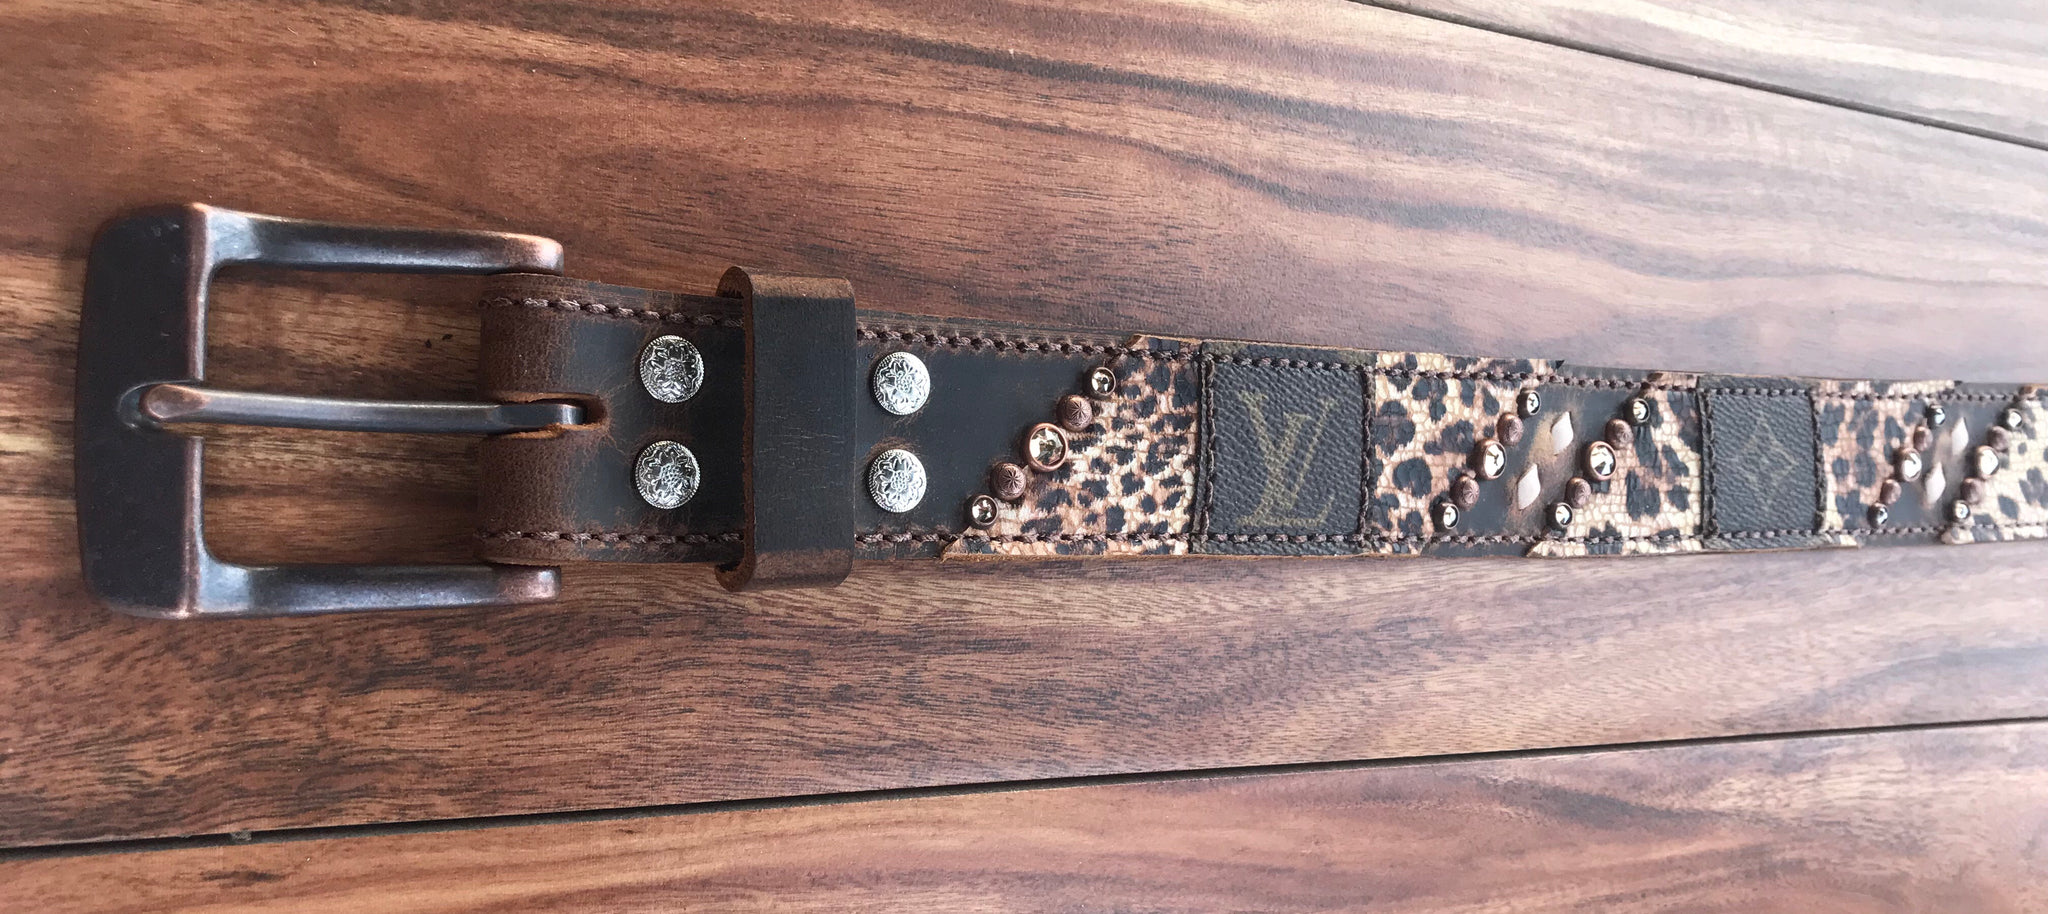 Time to get your repurposed cheetah Louis Vuitton on💋exclusively at UTG's